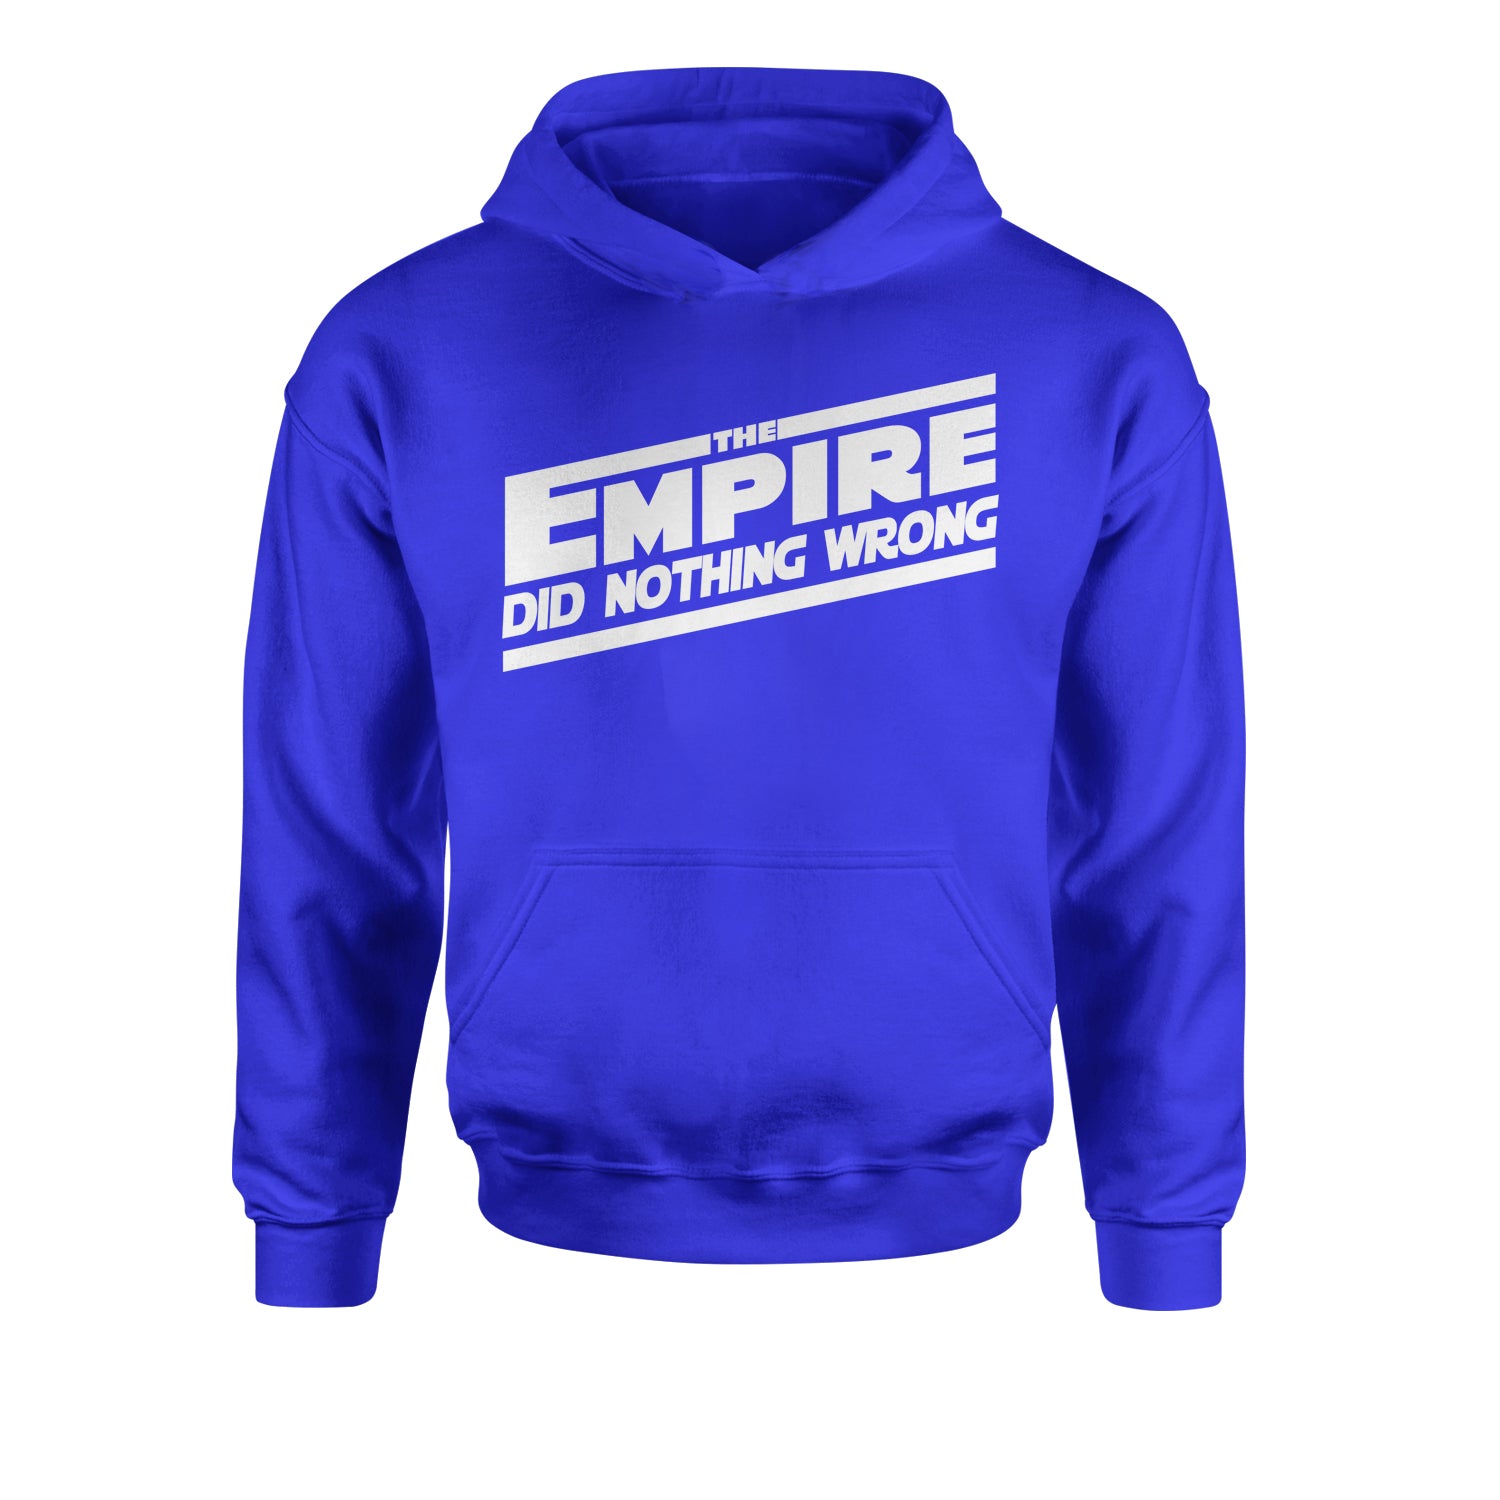 The Empire Did Nothing Wrong Youth-Sized Hoodie rebel, reddit, space, star, storm, subreddit, tropper, wars, youth-sized by Expression Tees